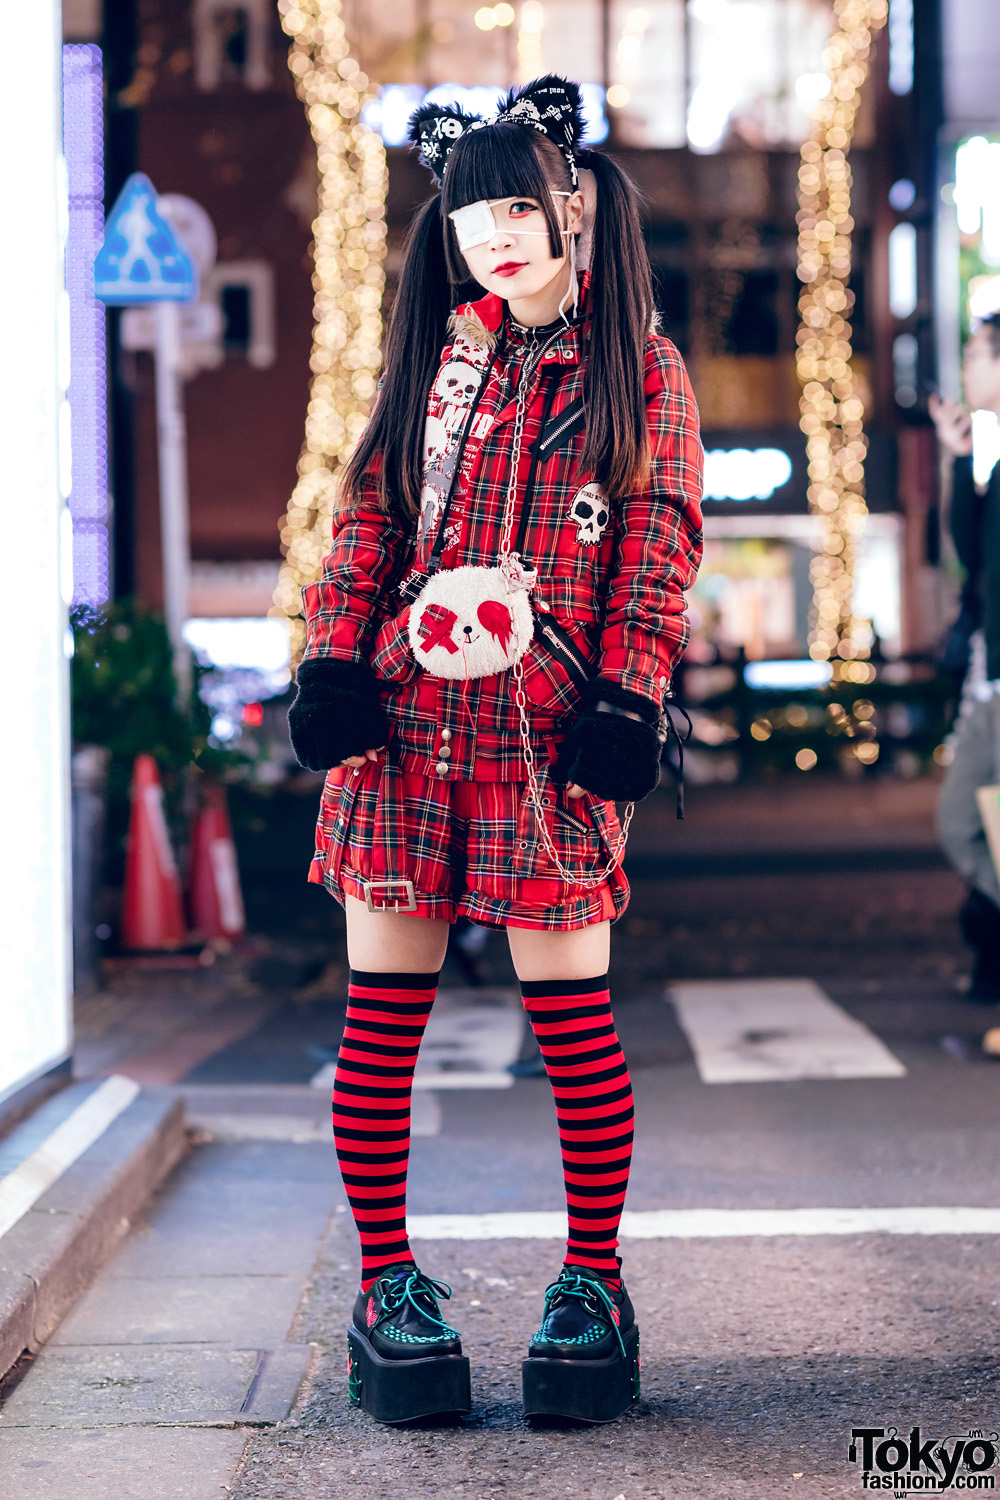 Harajuku Goth Girl in Red Plaid Street Fashion w/ Twin Tails, Cat Ears, Mad Punks Jacket, Hangry&Angry, Super Lovers & Yosuke